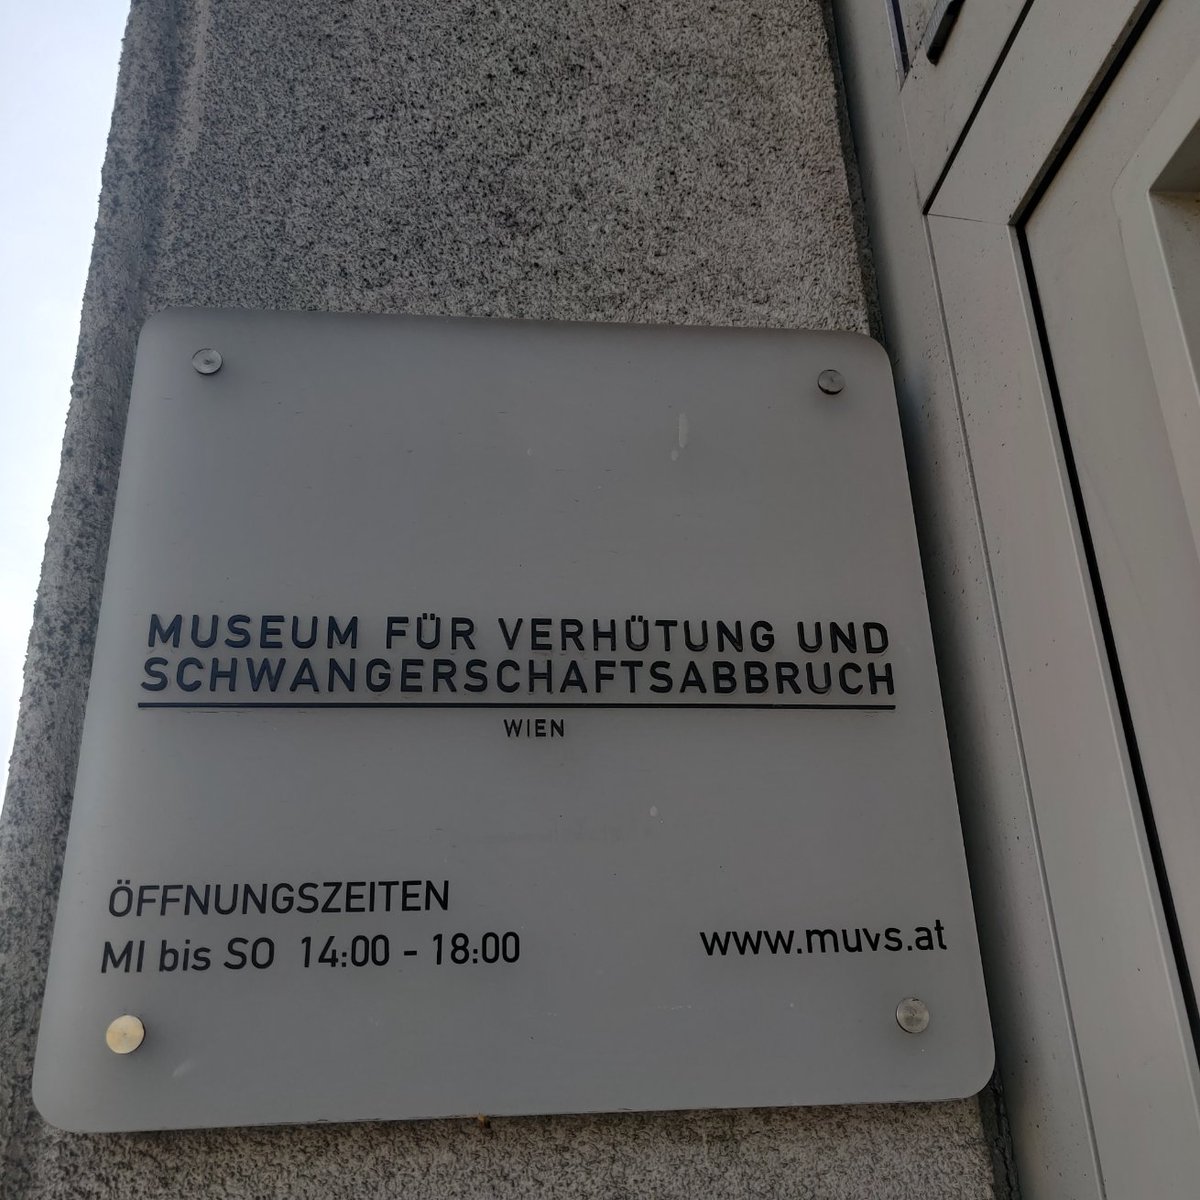 I mean it is the 28th of September, so it was only right to visit the Museum for Contraception and Abortion in Vienna! #28S #FreeSafeLegalLocal